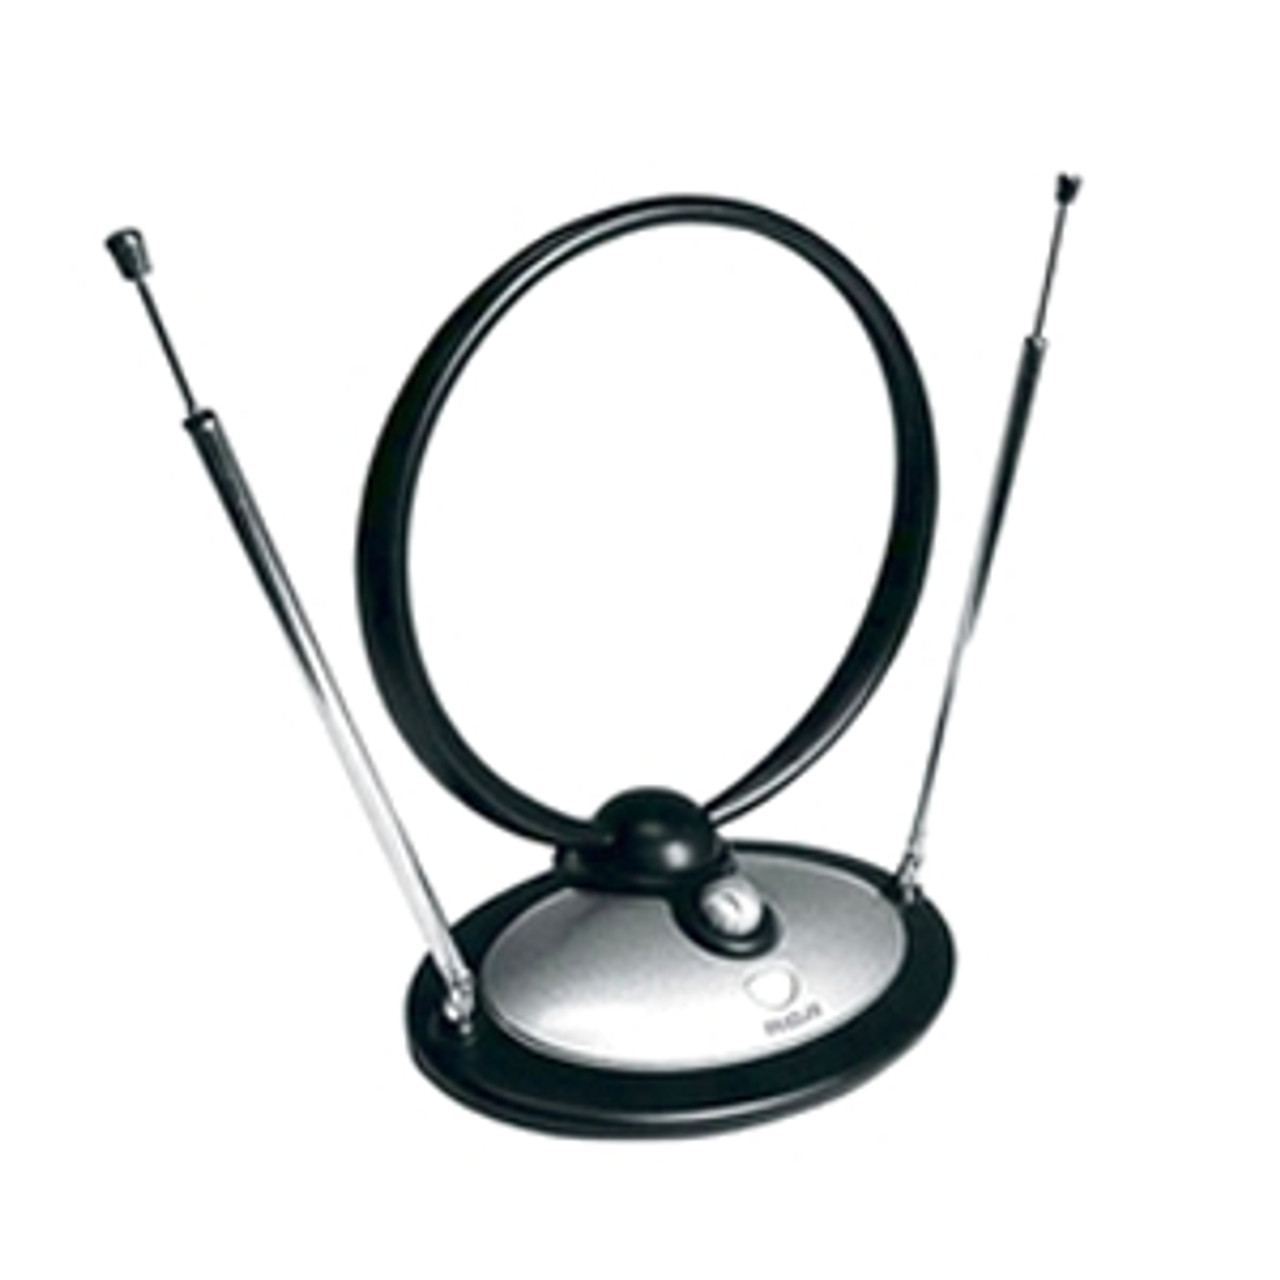 ANT525 RCA Indoor Amplified TV Antenna 45 dB